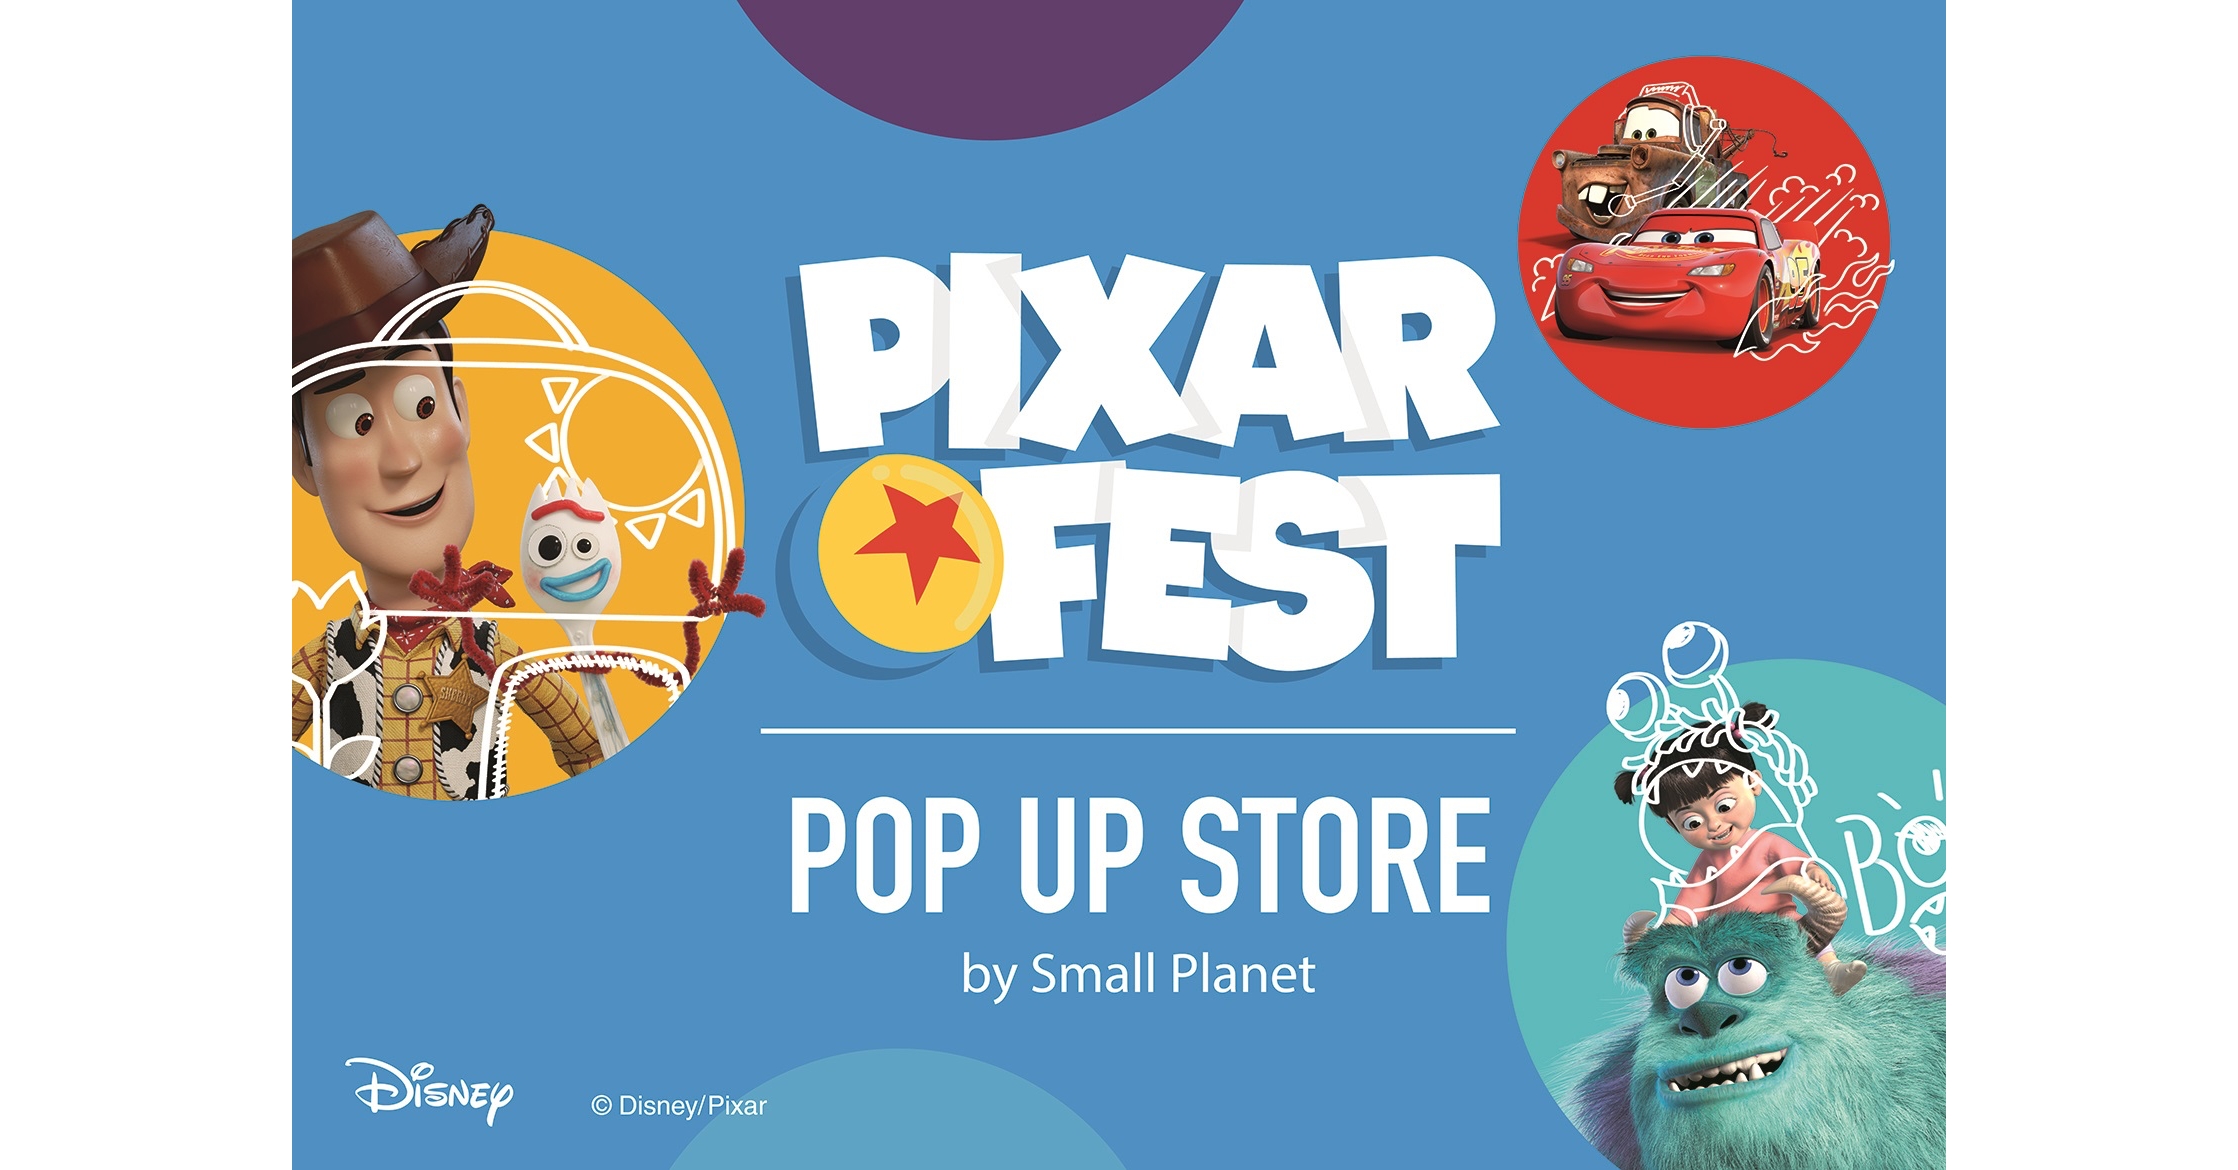 pixar-fest-pop-up-store-by-small-planet1